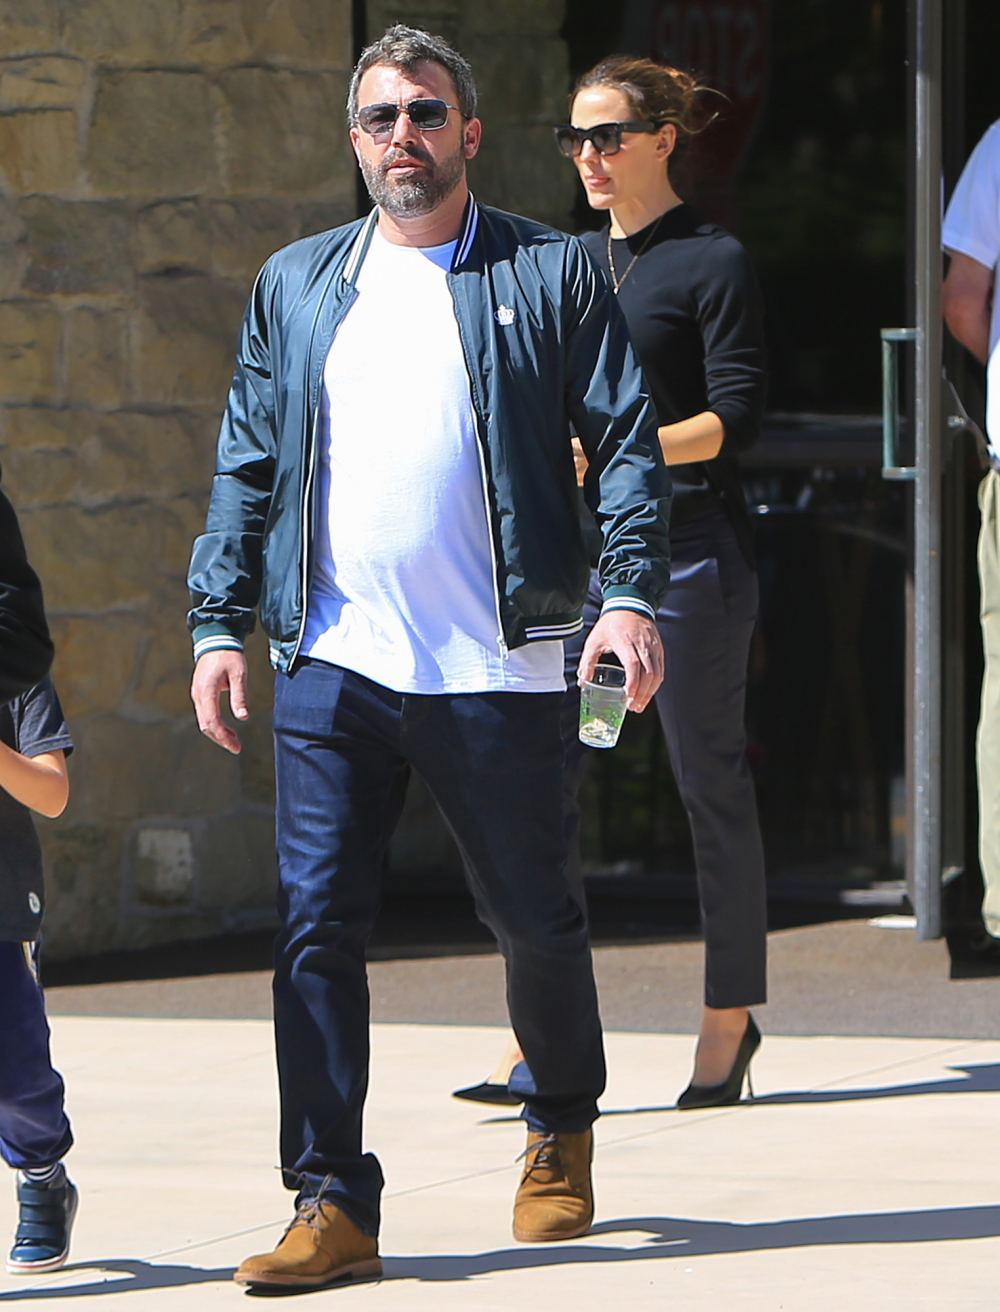 Ben Affleck Attends Church Service With Jennifer Garner Amid His Treatment for Alcoholism